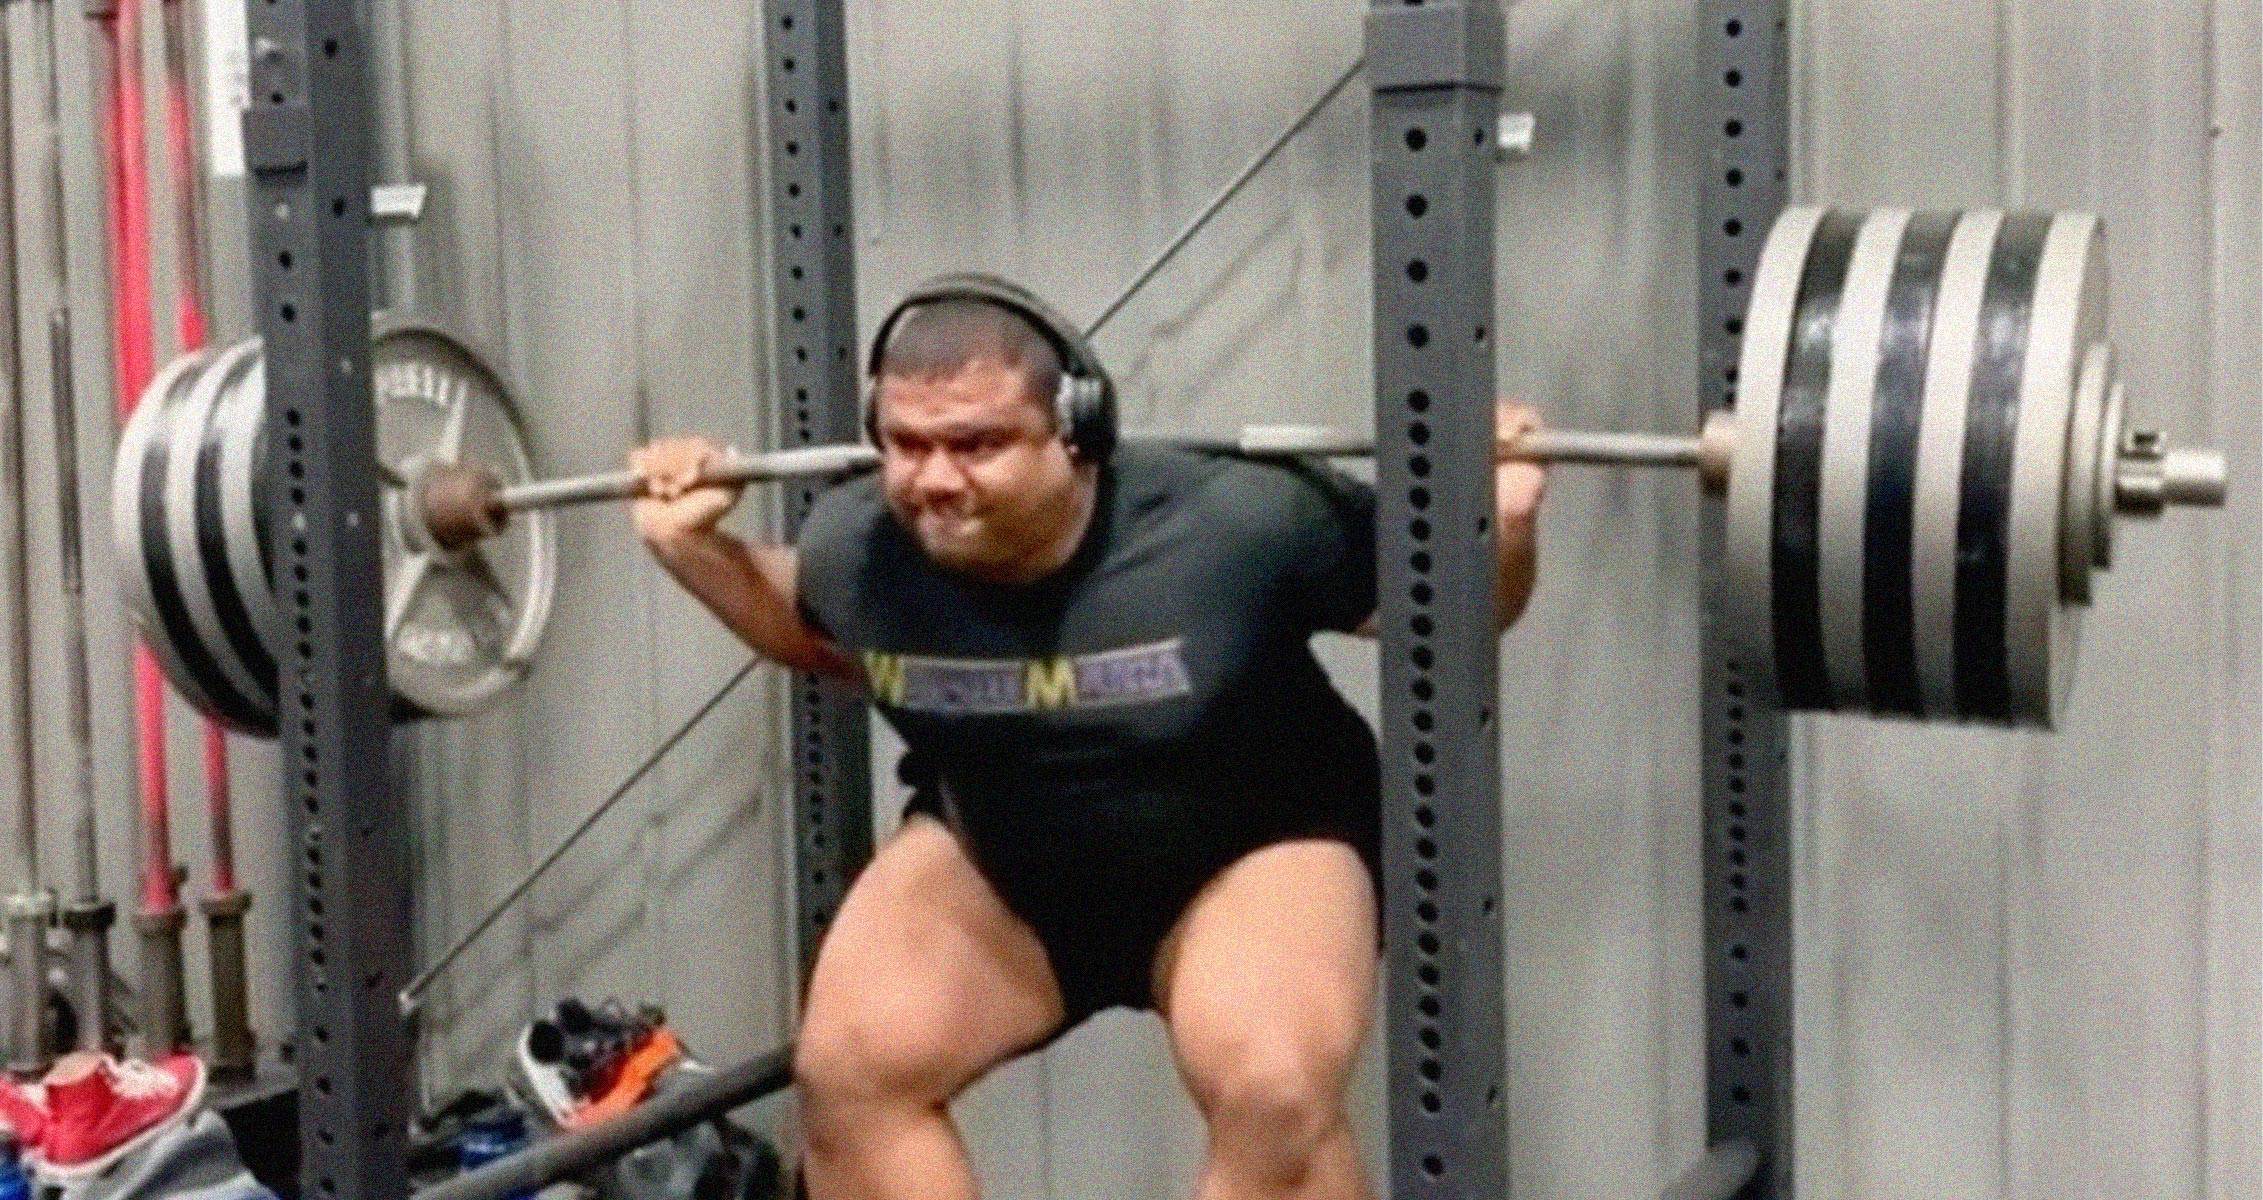 Chris Craft Shows Off Massive 317.5 Squats Without Belt Or Knee Sleeves